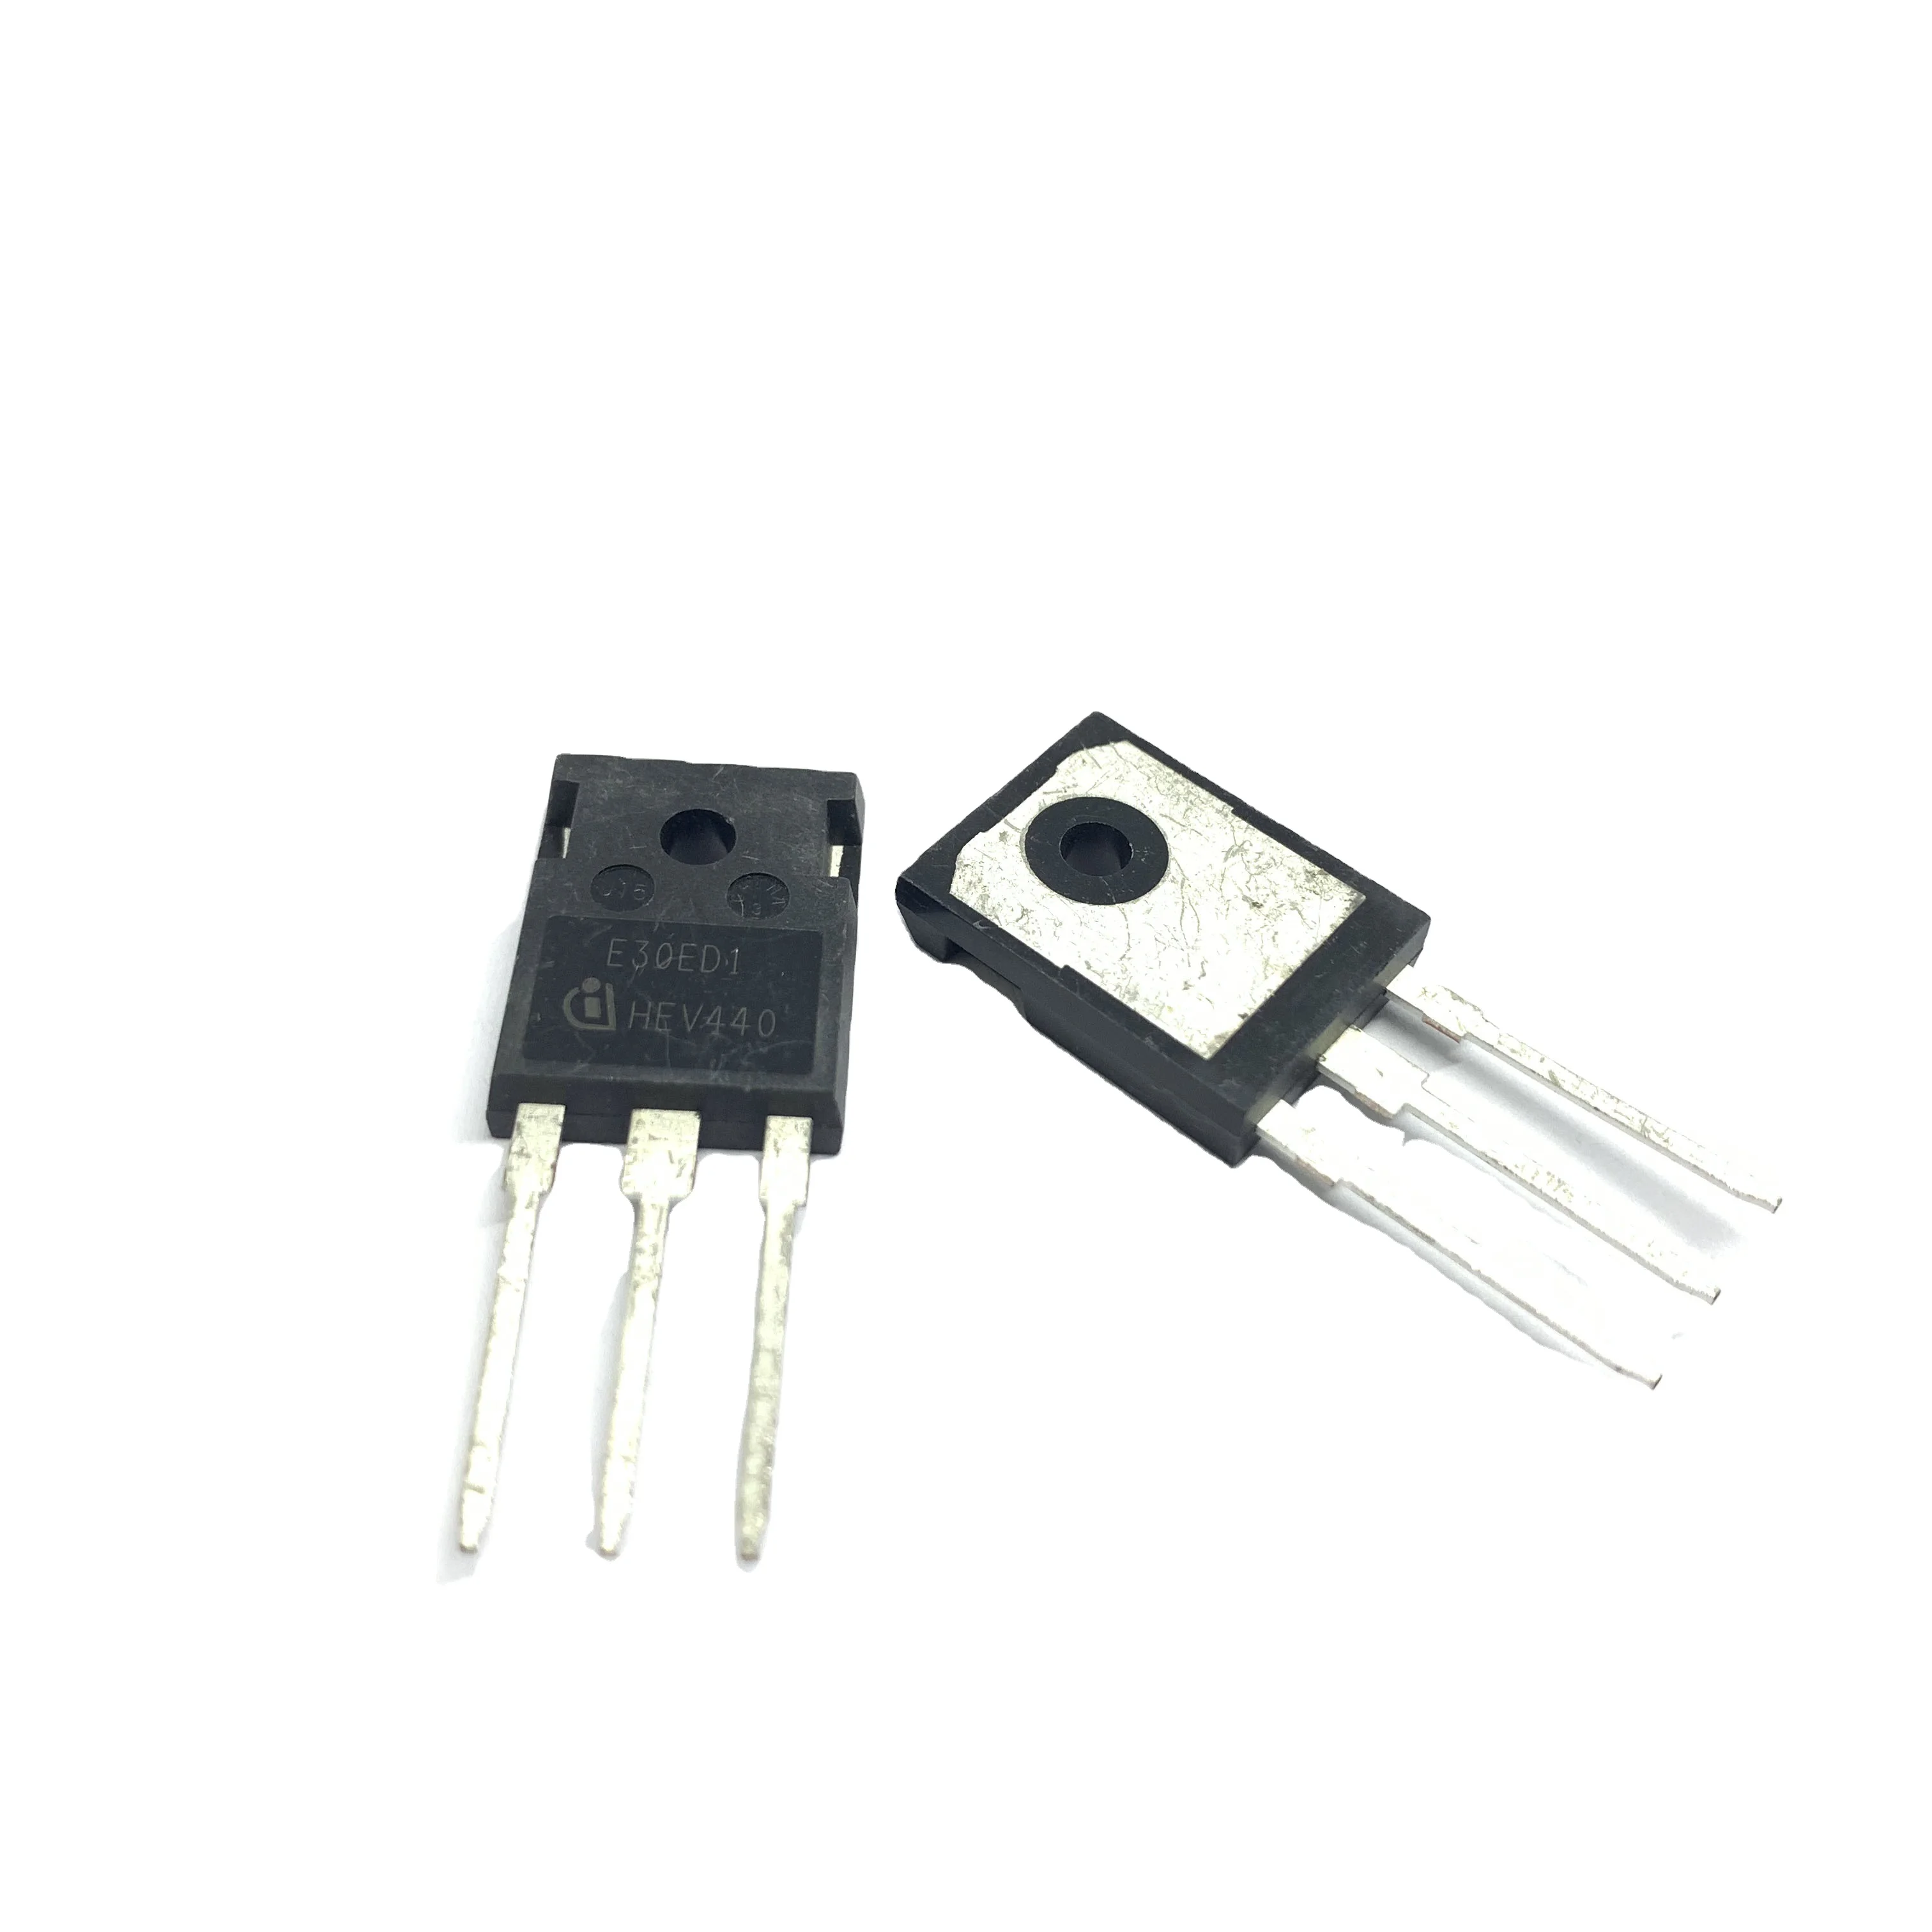 Merrillchip Integrated Circuits  Voltage Regulator IC Rapid Switching Emitter Controlled Diode E30ED1